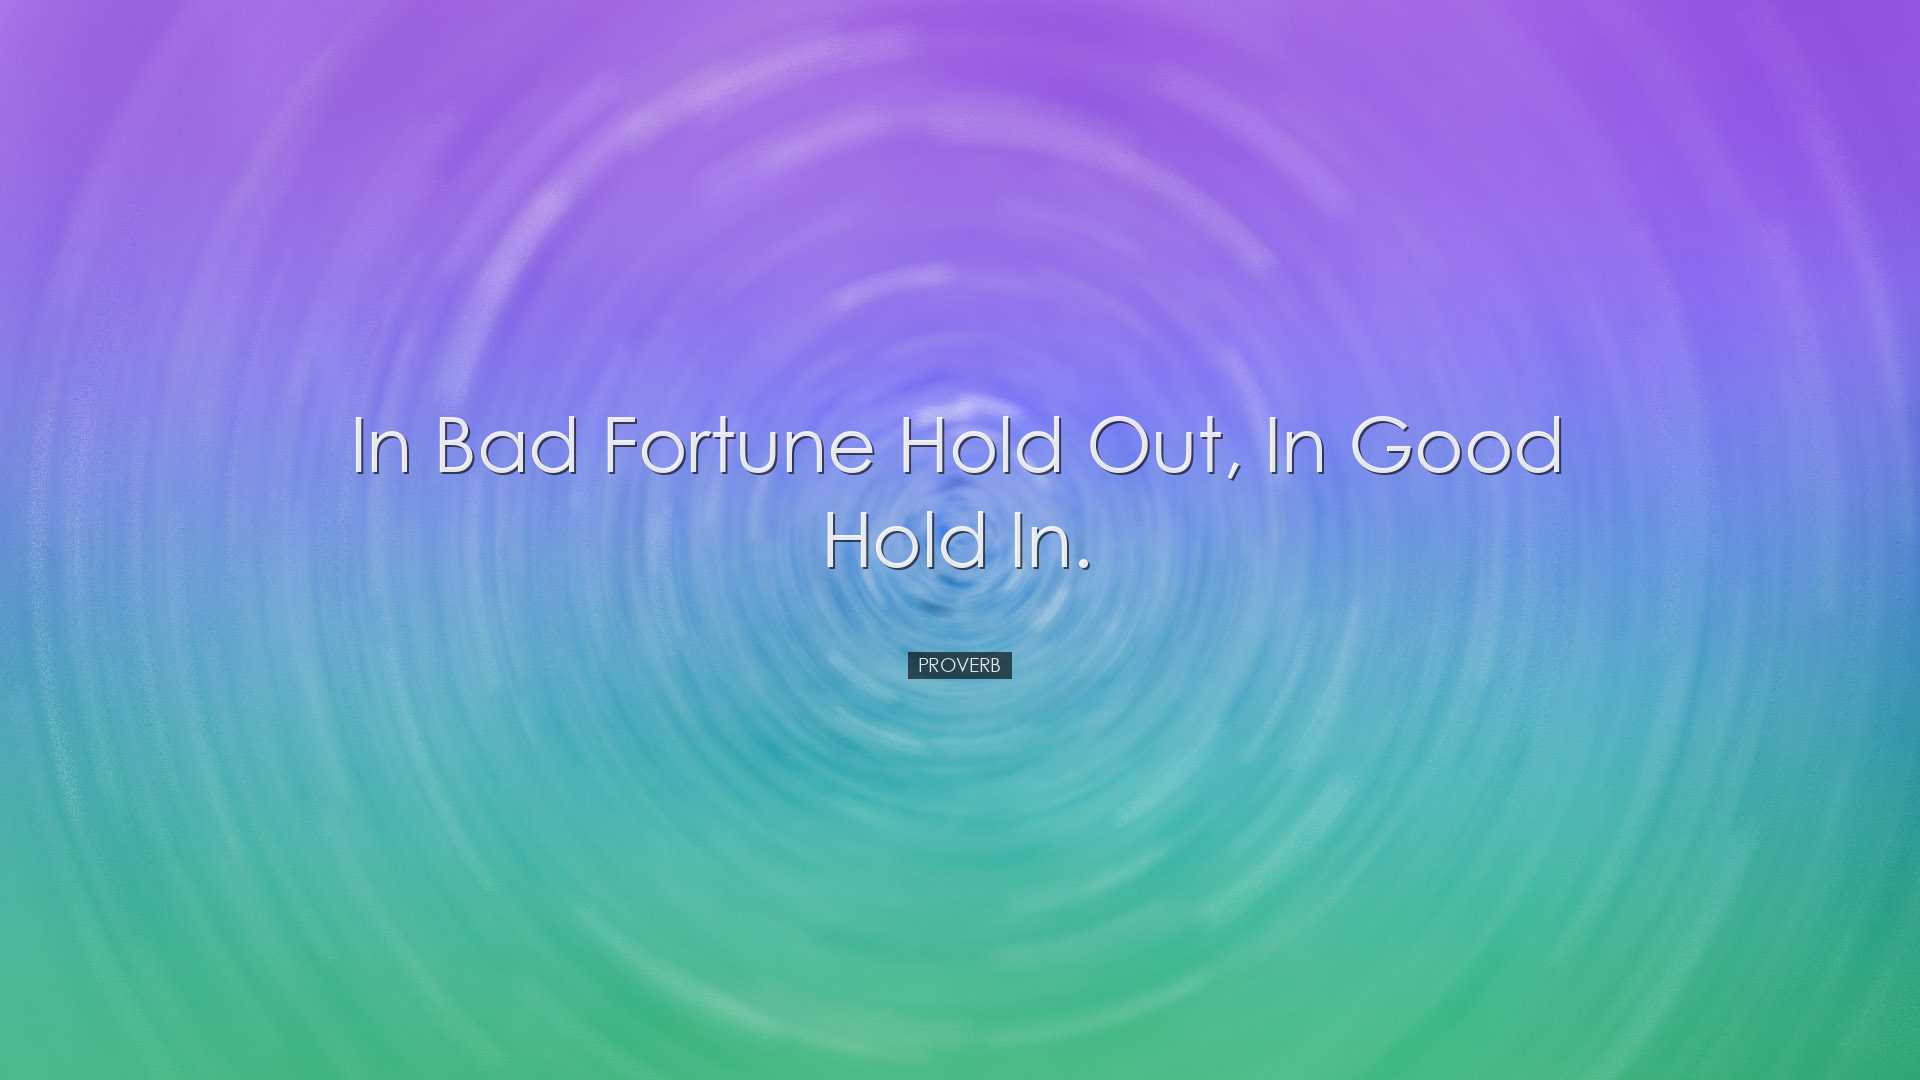 In bad fortune hold out, in good hold in. - Proverb